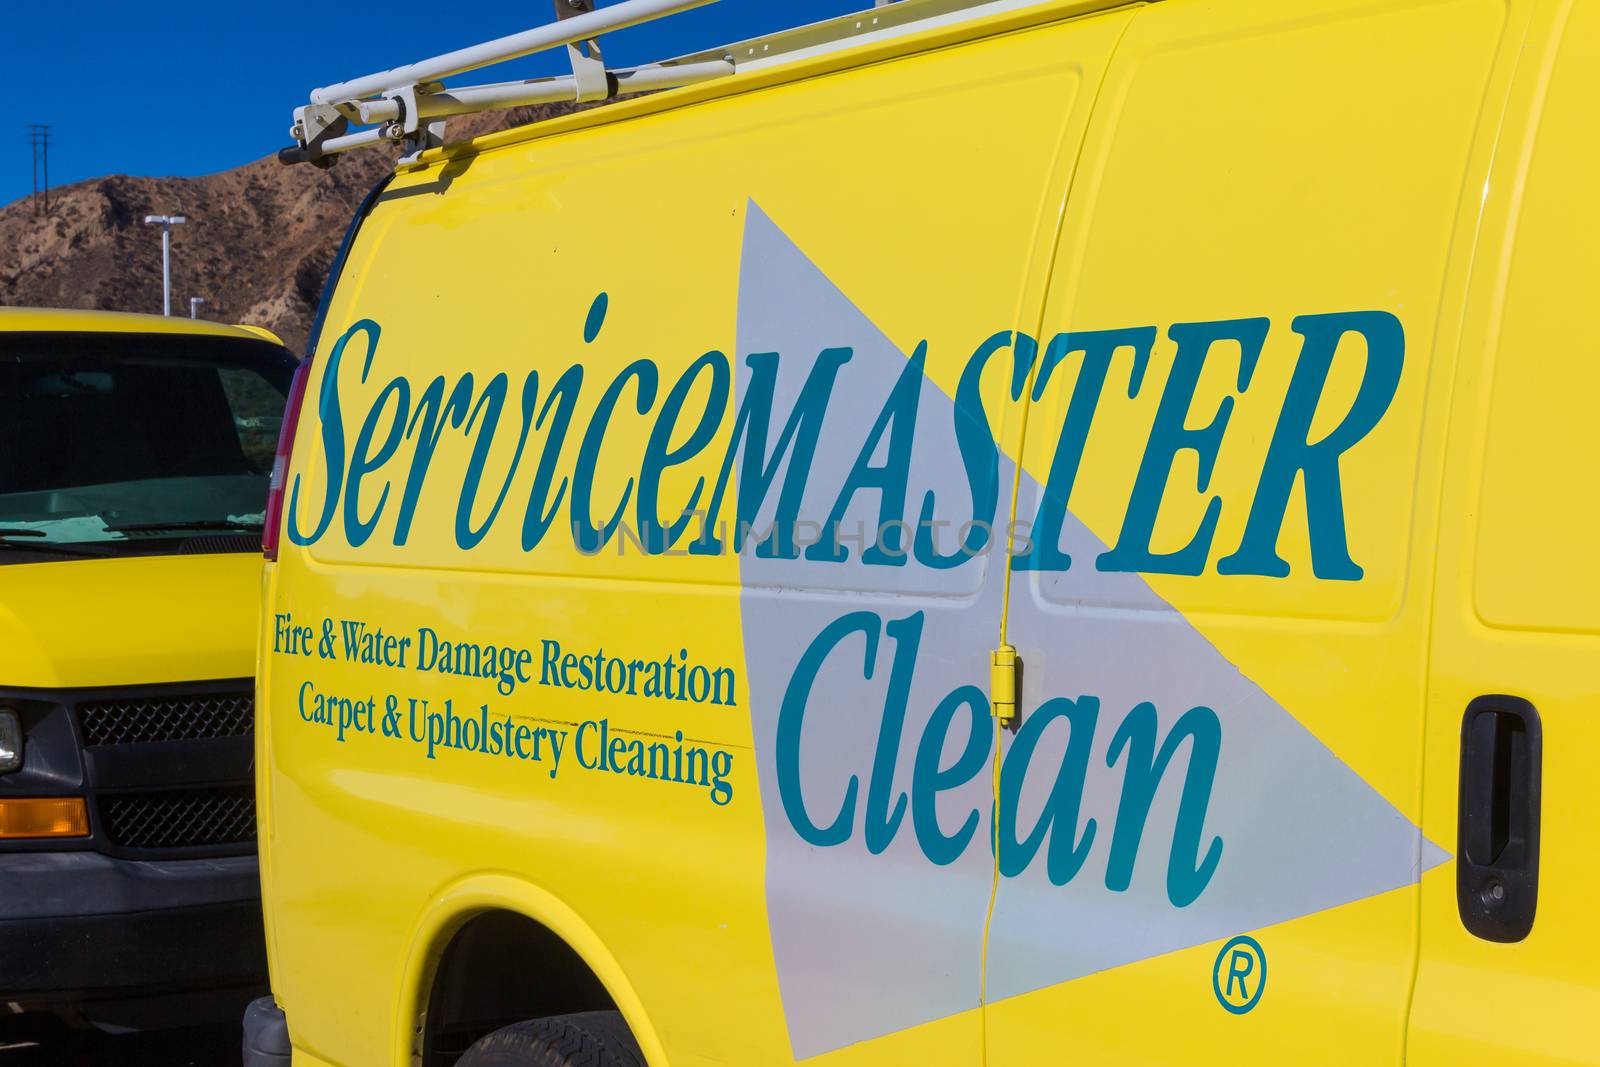 ServiceMaster Vehicle and Logo by wolterk